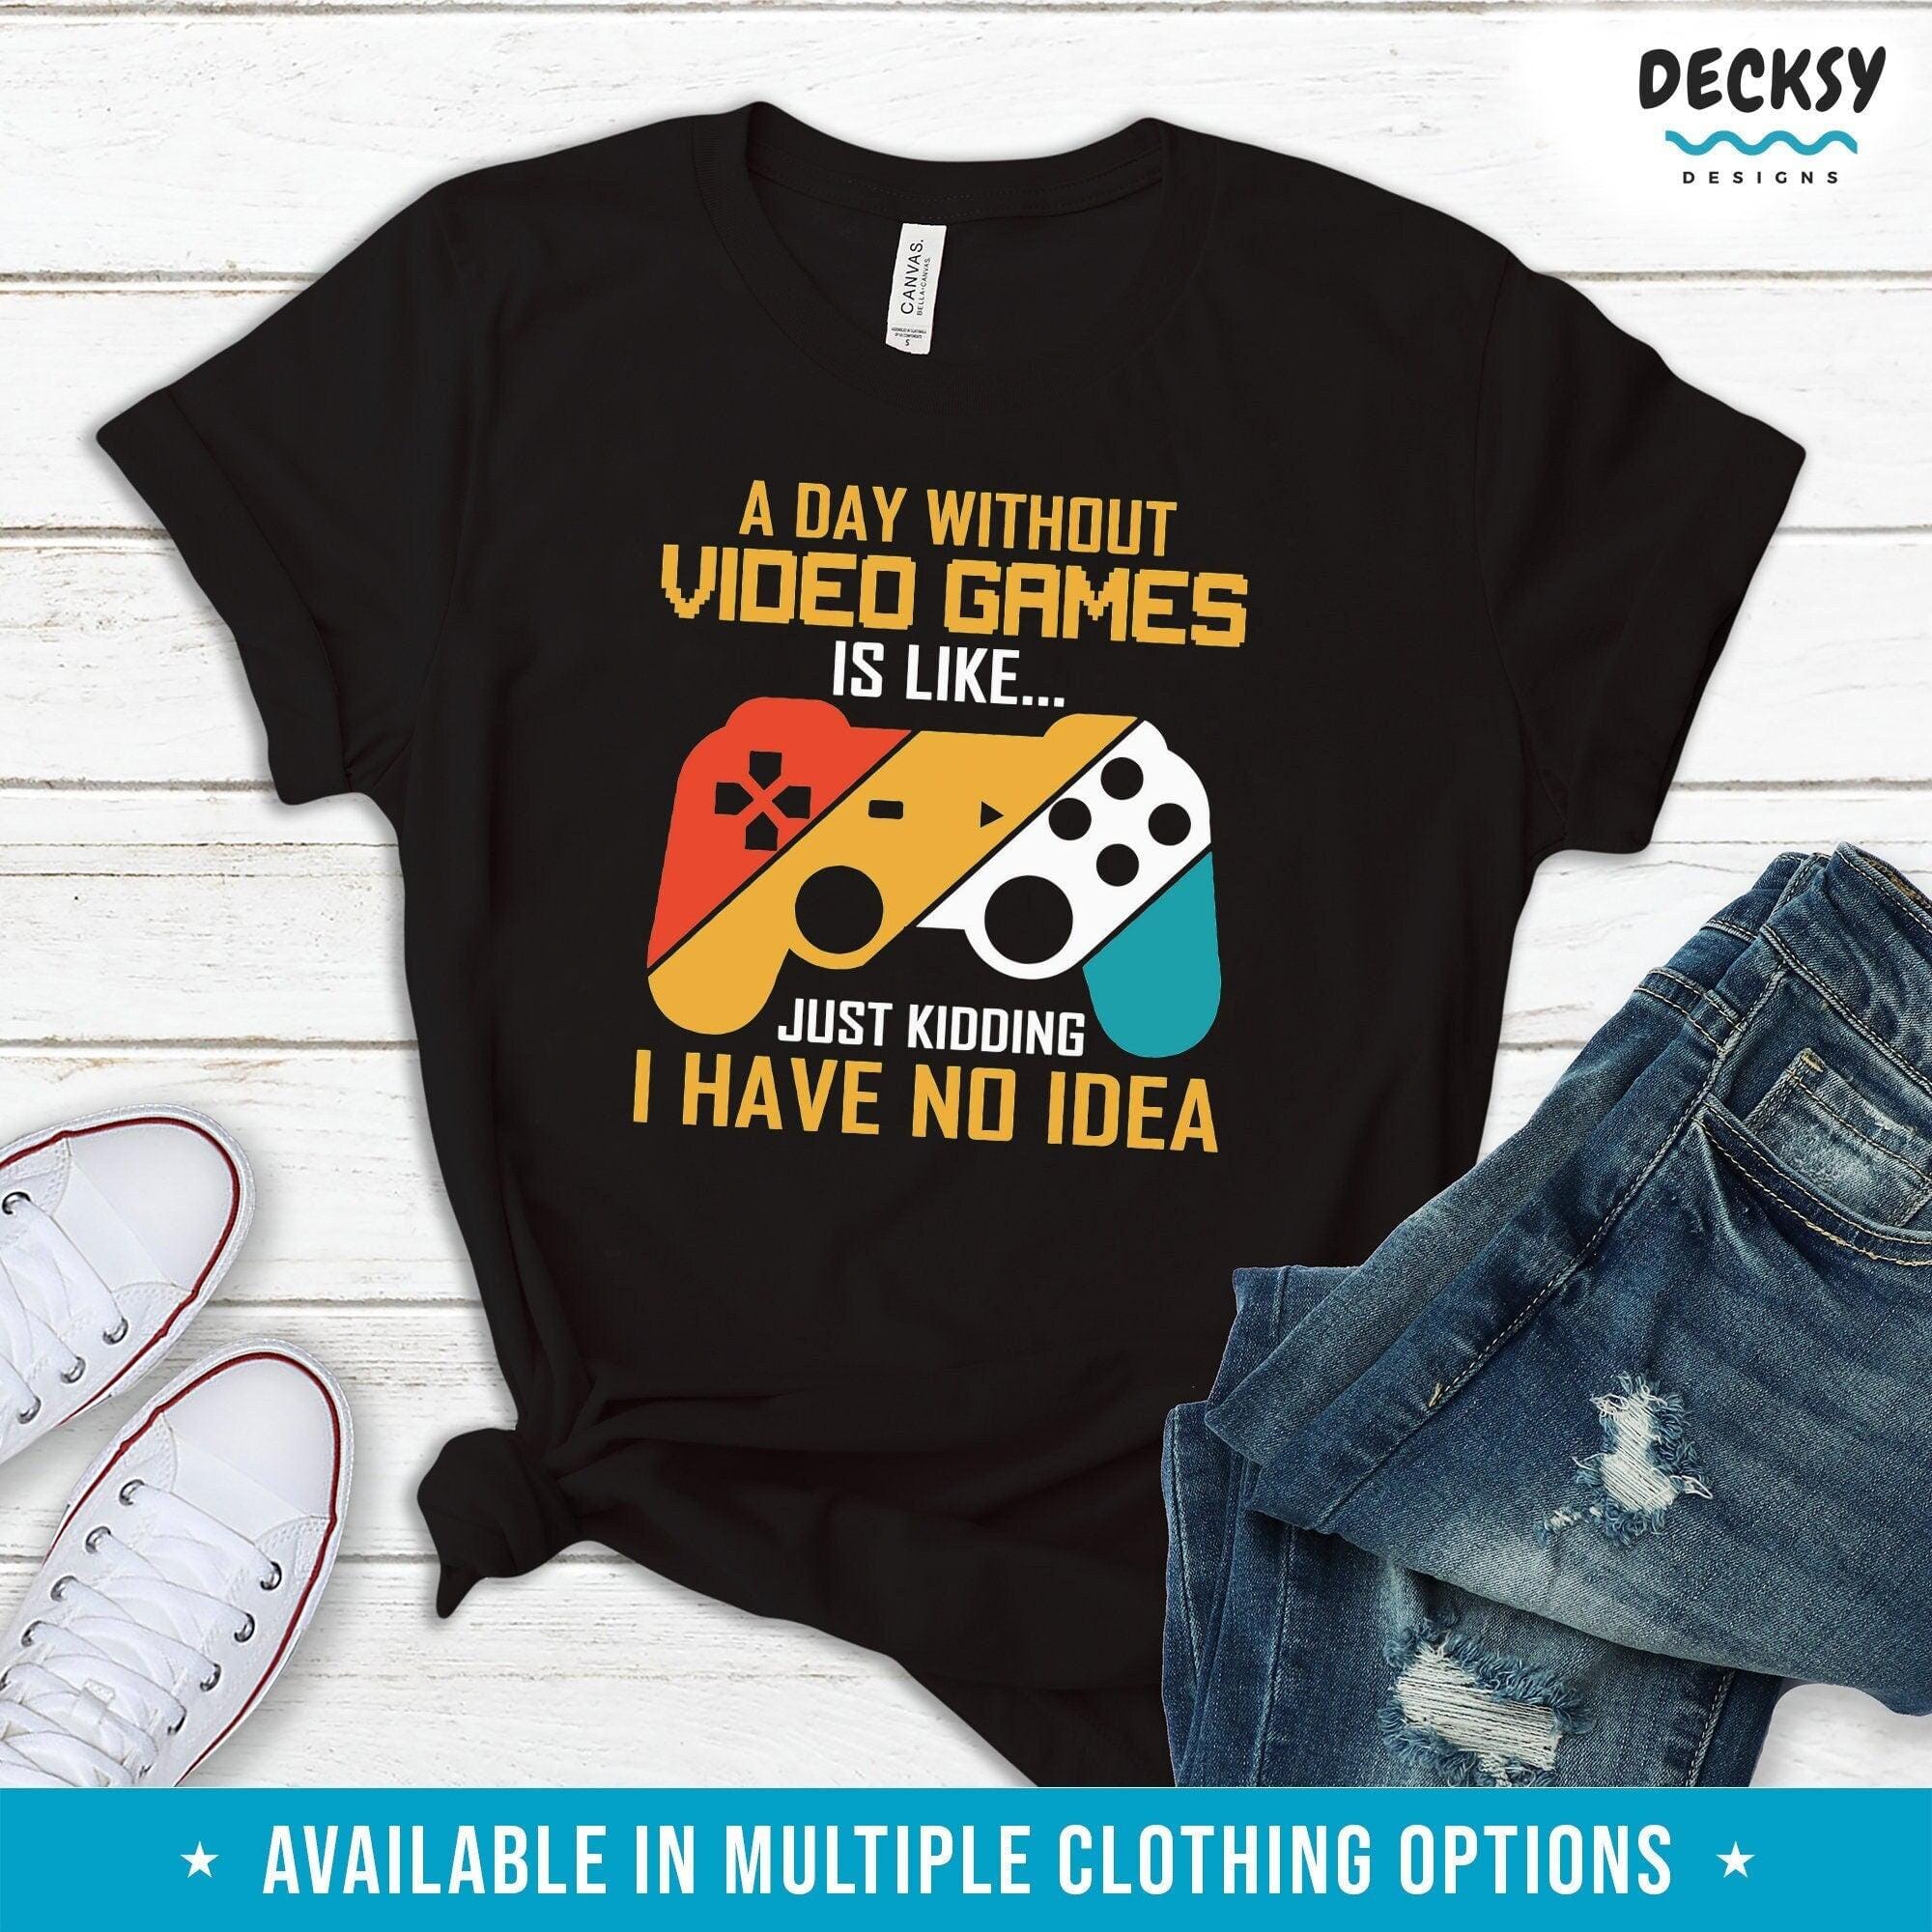 Retro Gaming Shirt, Funny Gamer Gift-Clothing:Gender-Neutral Adult Clothing:Tops & Tees:T-shirts:Graphic Tees-DecksyDesigns